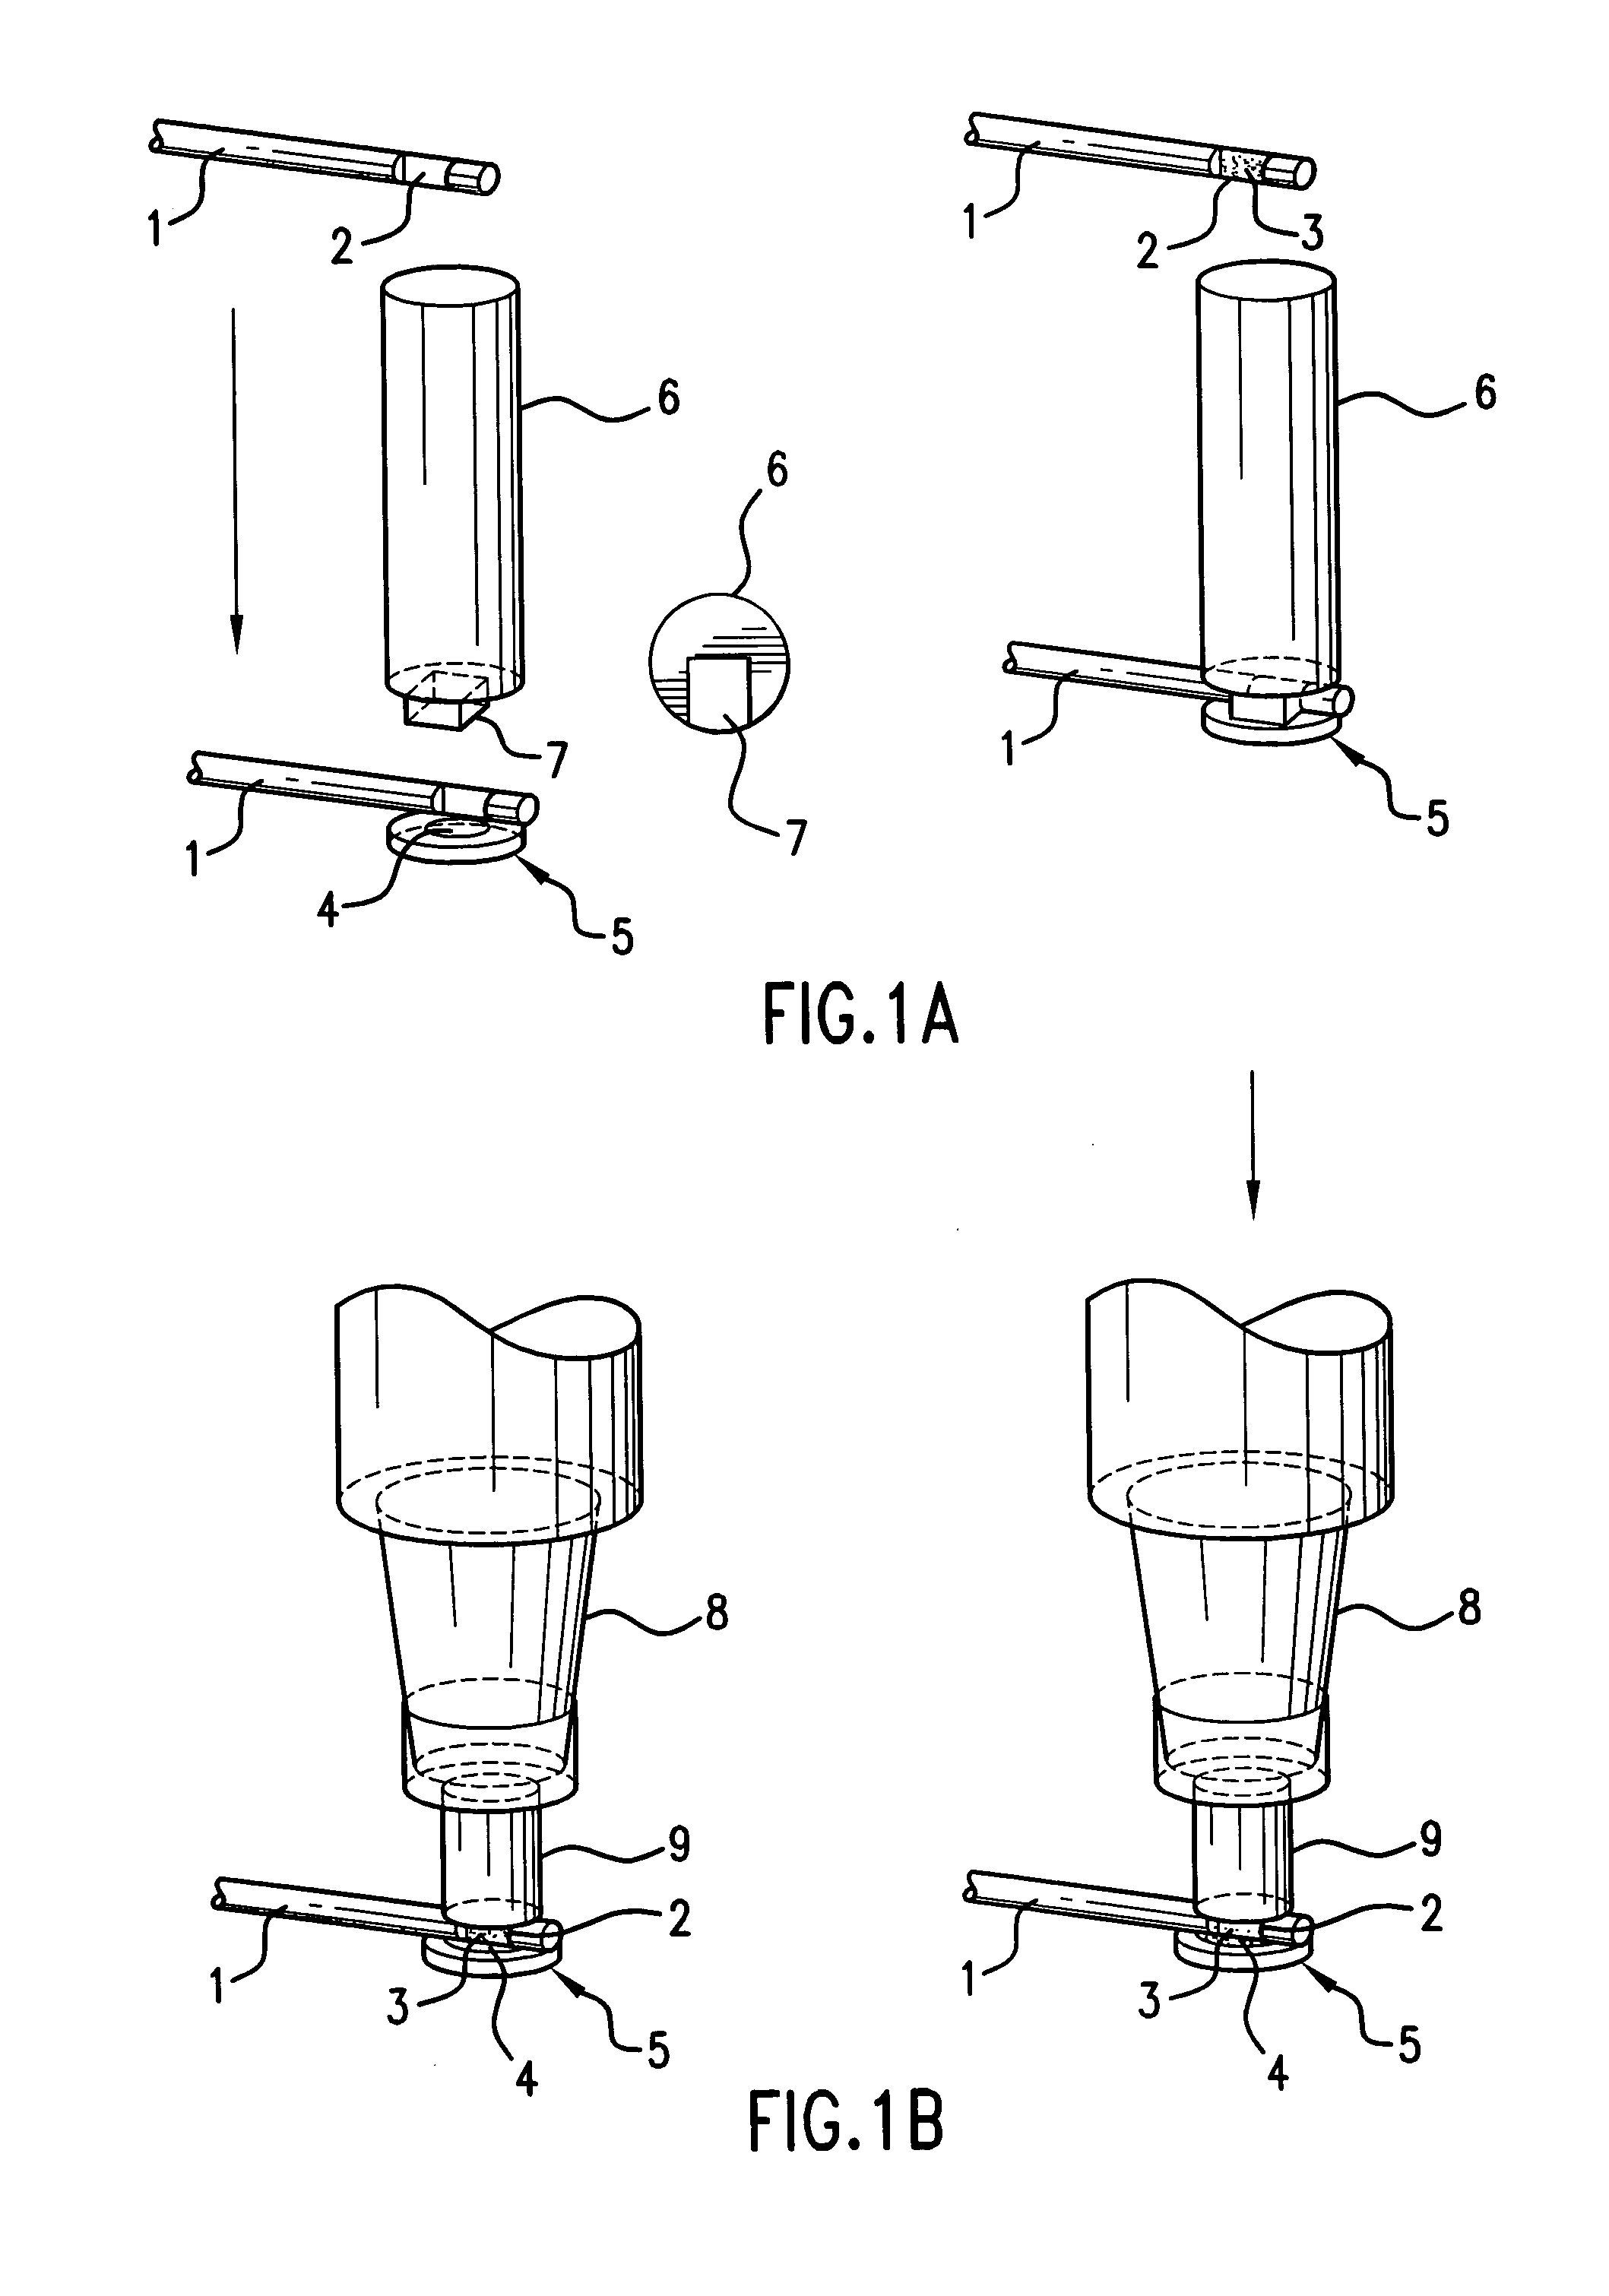 Apparatus for handling biopsy specimens, and method for using it